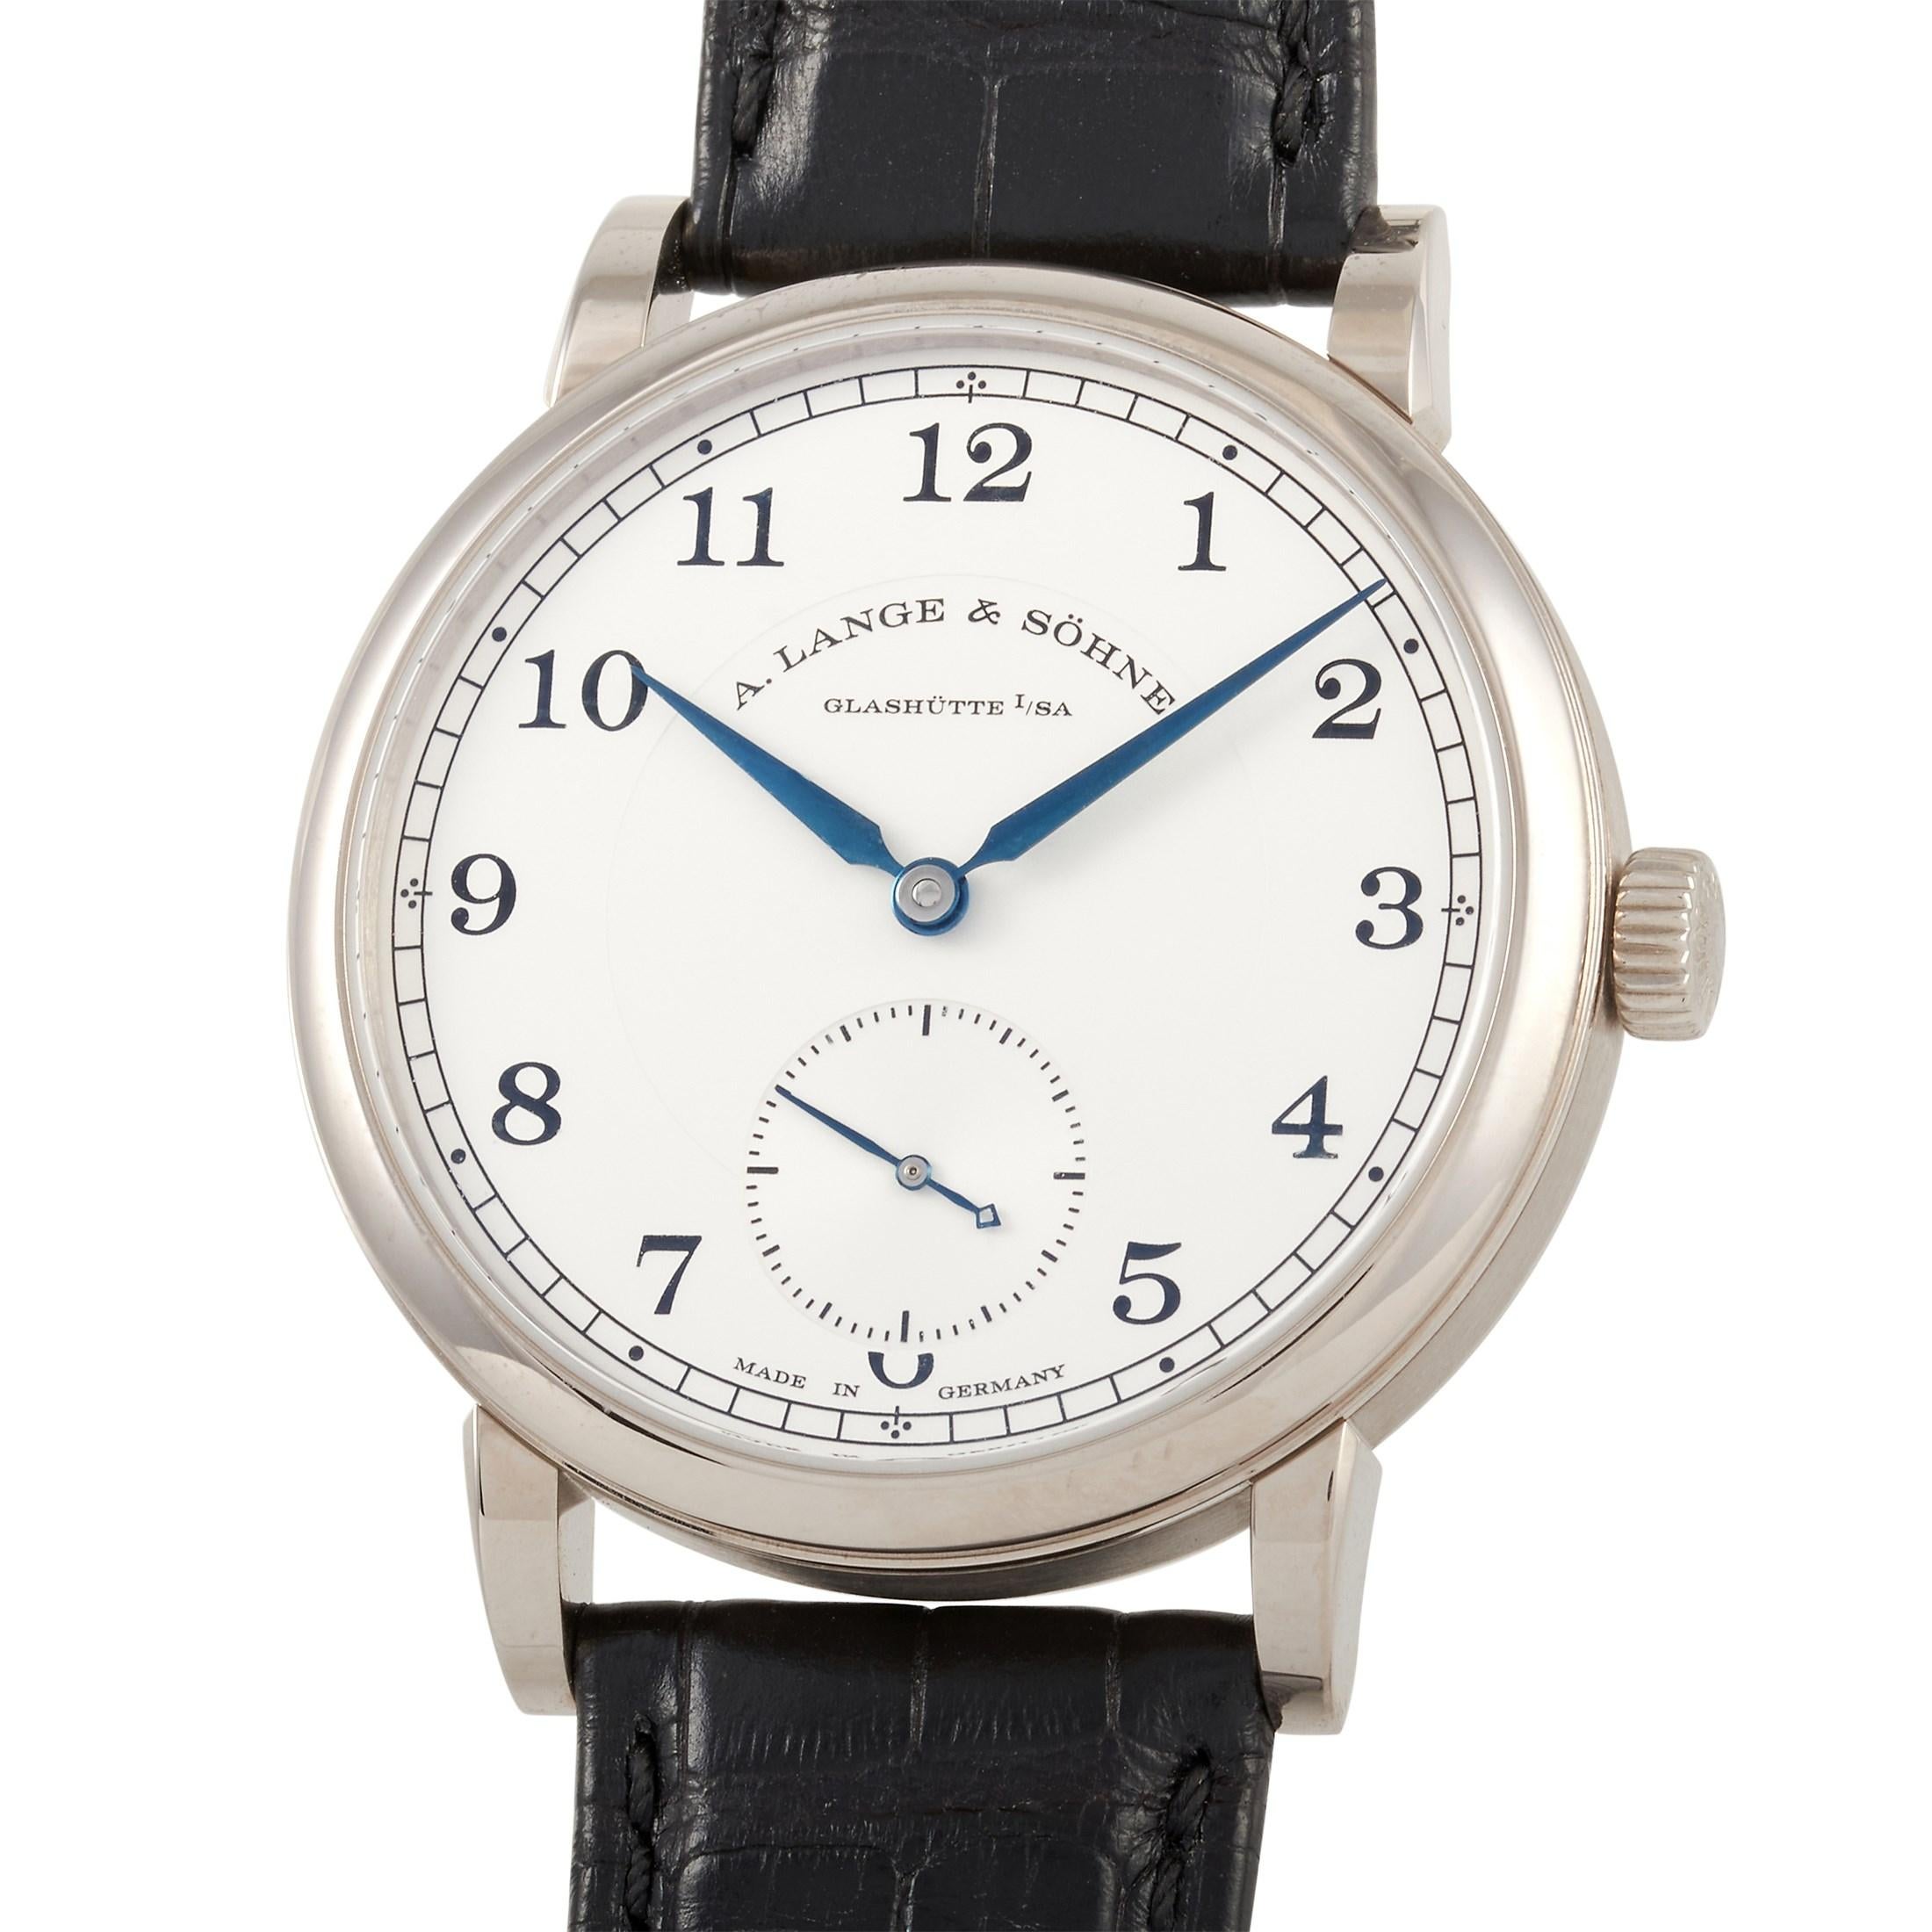 This A. Lange & Sohne Lange 1815 38.5mm 18K White Gold Watch, reference number 235.026, comes with an 18K white gold case that measures 38.5 mm in diameter. The case is presented on a sleek black Alligator leather strap with tang closure. The